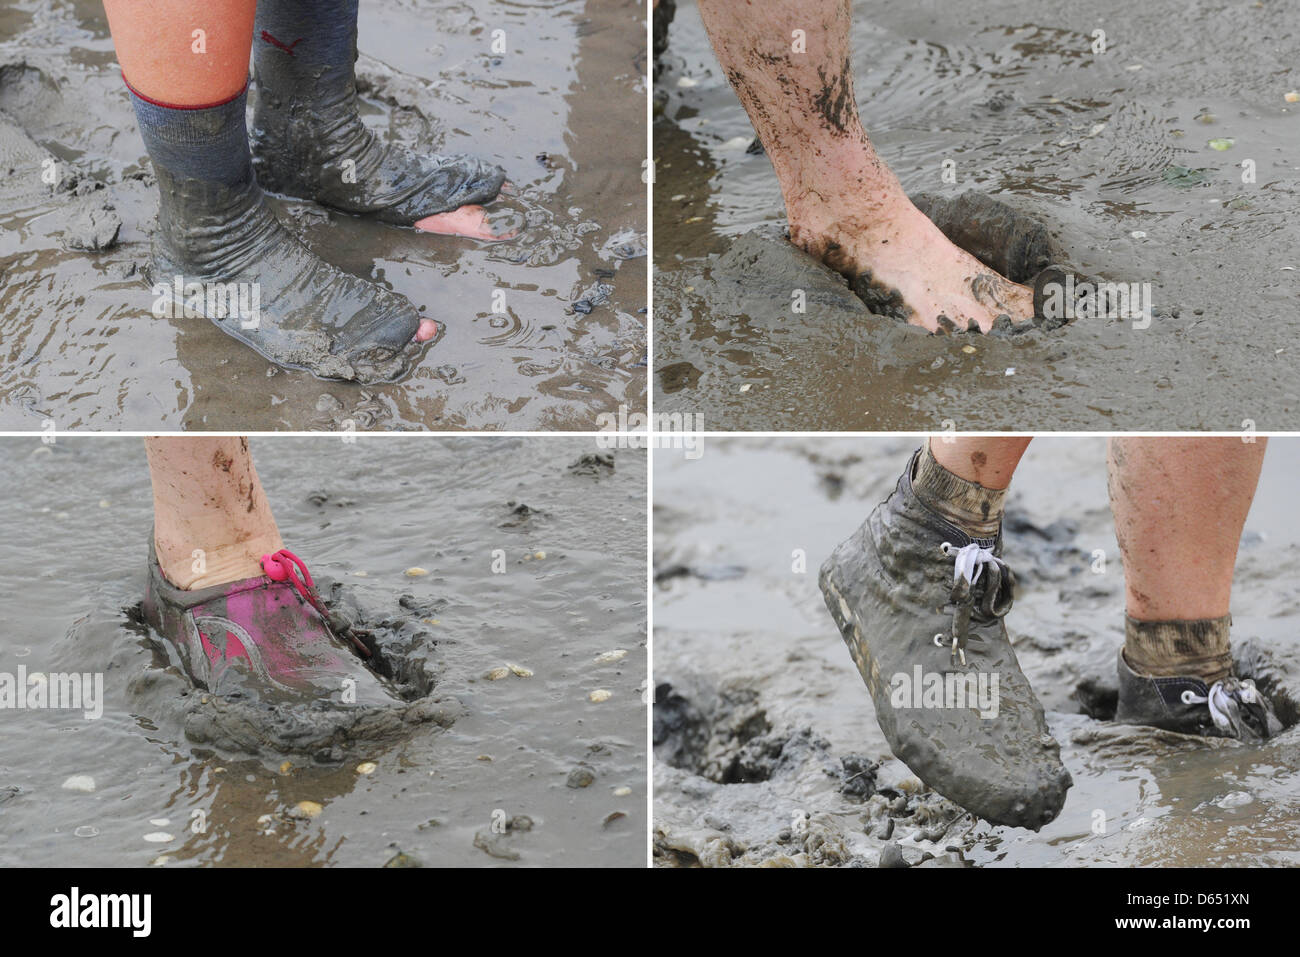 COMPOSITE PICTURE - A composite picture dated 09 June 2012 shows the shoes of people walking across the mudflats of the wadden sea between Nessmersiel and the island of Baltrum during stong wind and rains at the North Sea coast near Baltrum, Germany. Meteorologists predict changing weather for the coming few days. Photo: JULIAN STRATENSCHULTE Stock Photo